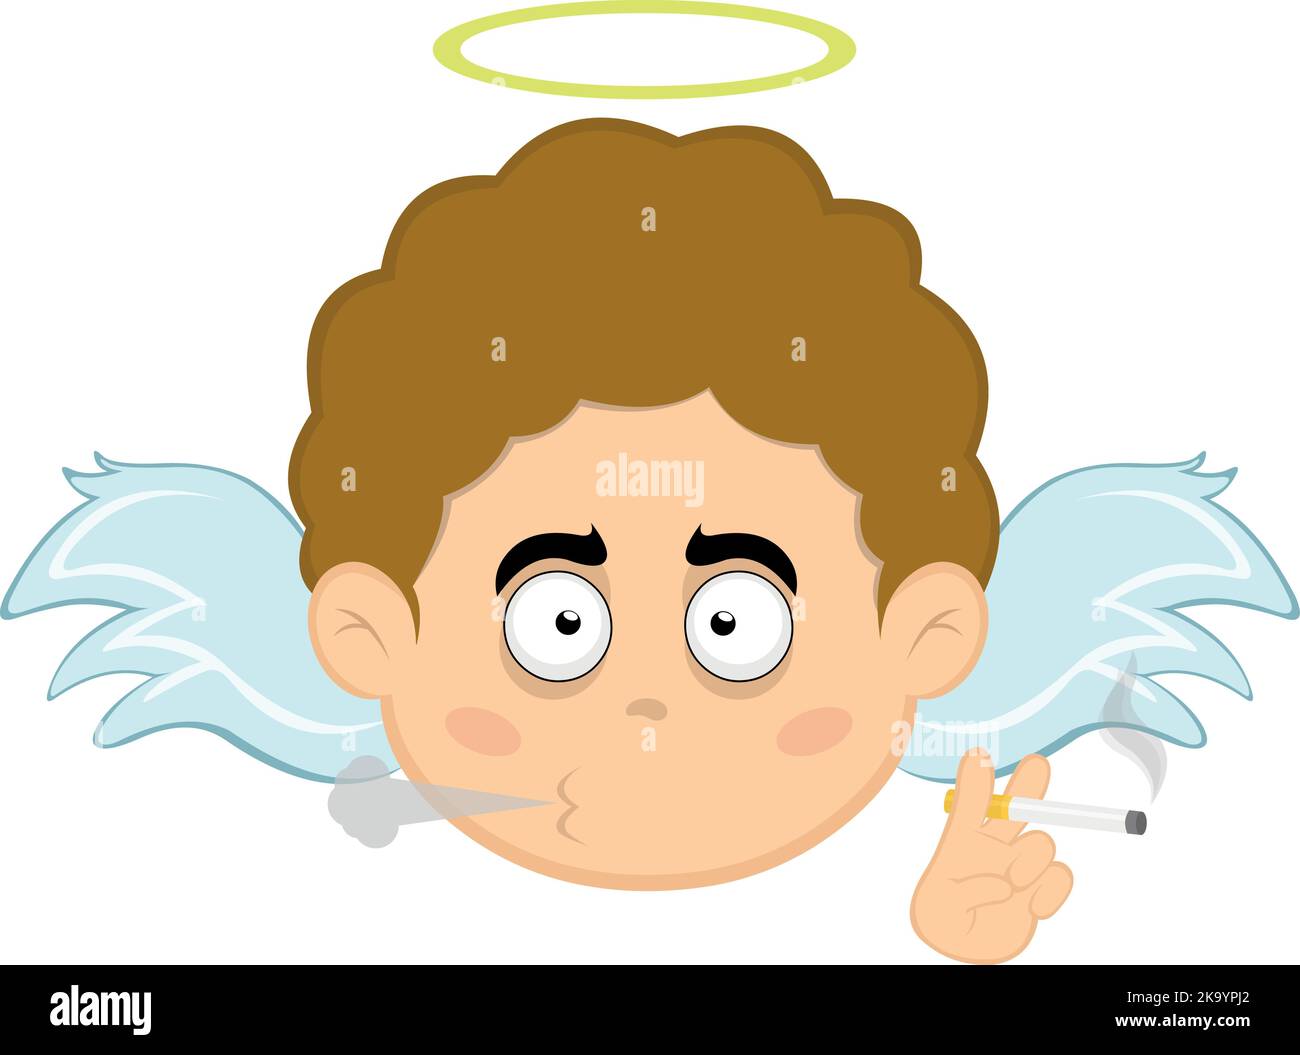 Vector illustration of the face of a cartoon angel smoking with a cigarette in his hand Stock Vector